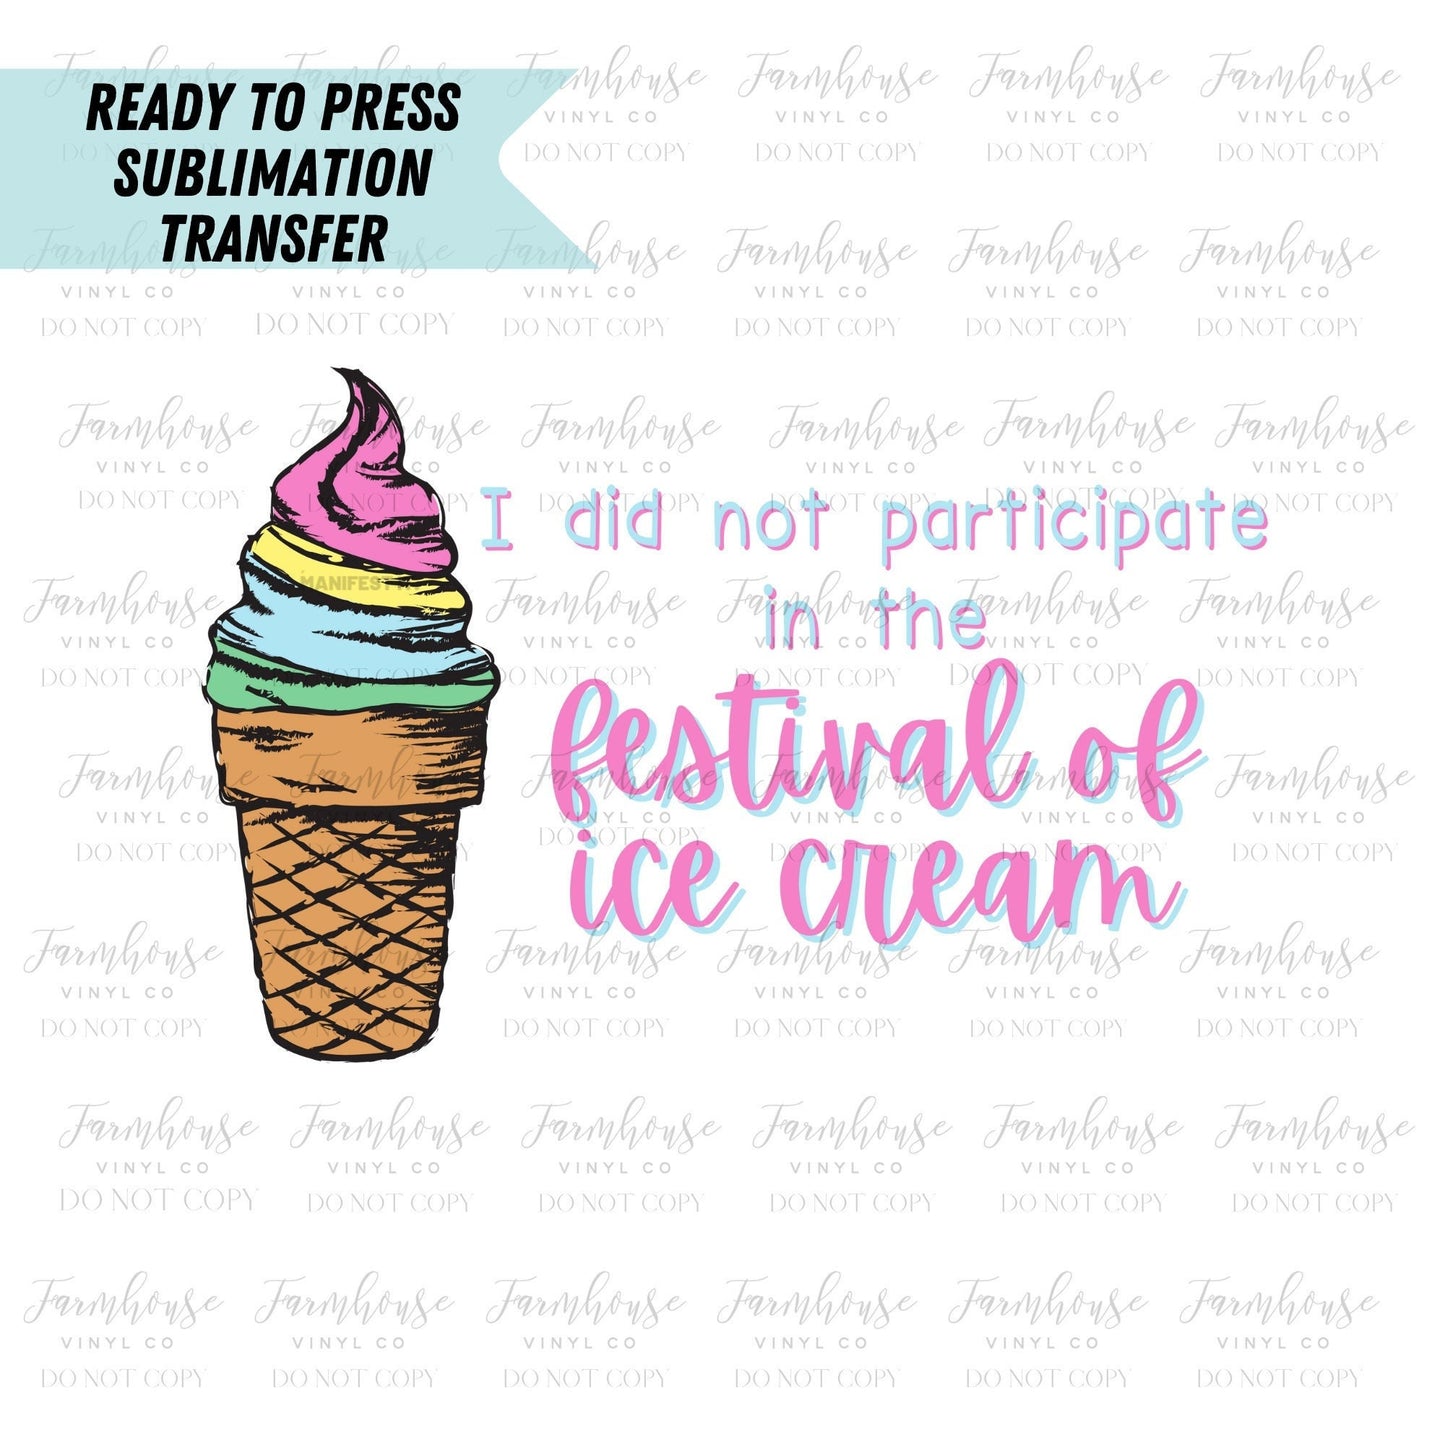 I did not Participate in the Festival of Ice Cream Ready To Press Sublimation Transfer - Farmhouse Vinyl Co